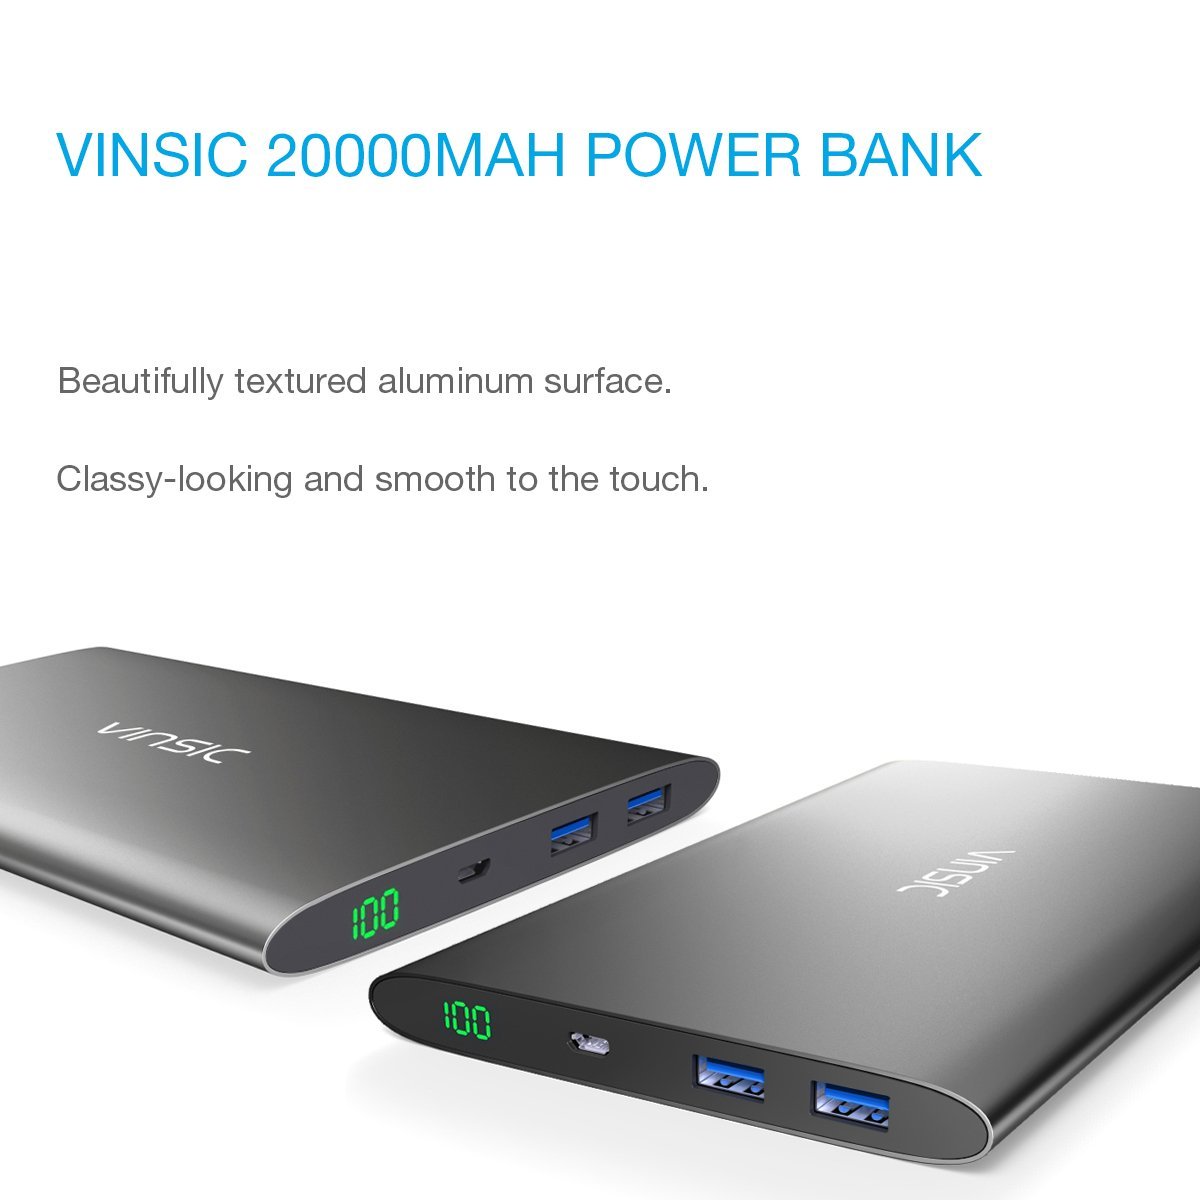 Vinsic 20000mAh Dual USB Power Bank for Smartphones, Tablets and PC, Grey -  CHARGE WITH POWER